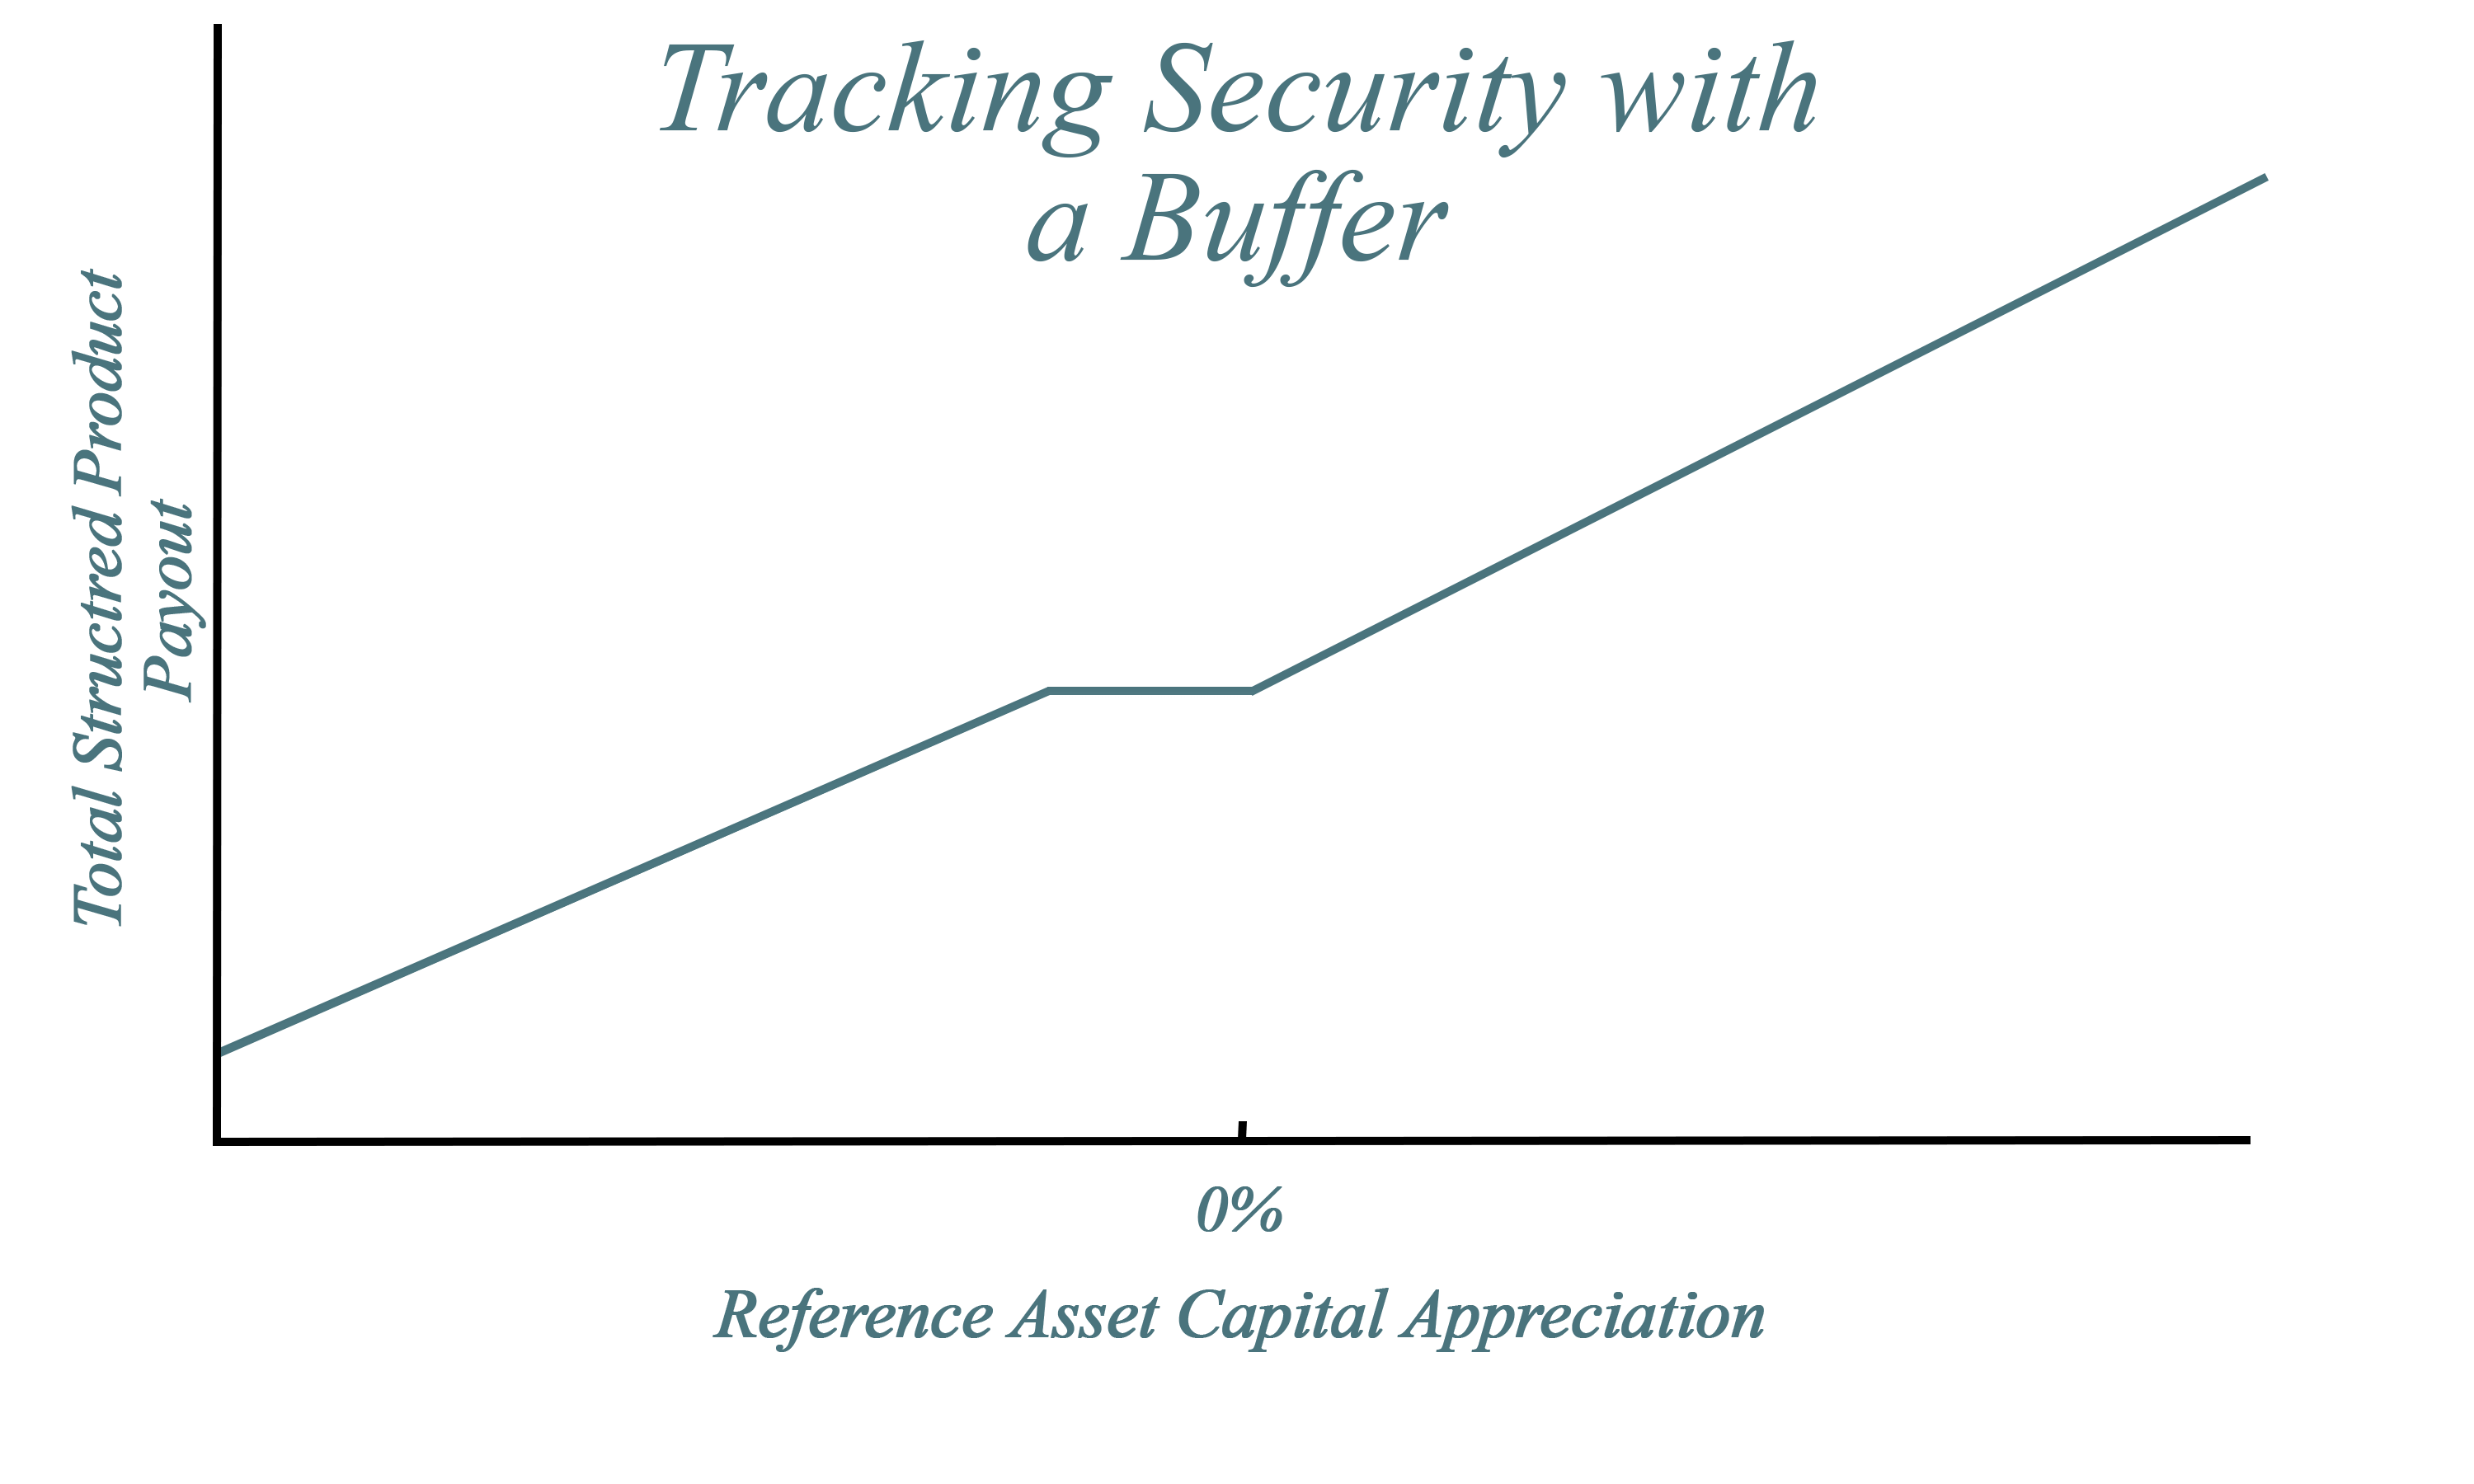 A graph demonstrating payout over capital appreciation for Basic Tracking Securities with Buffers